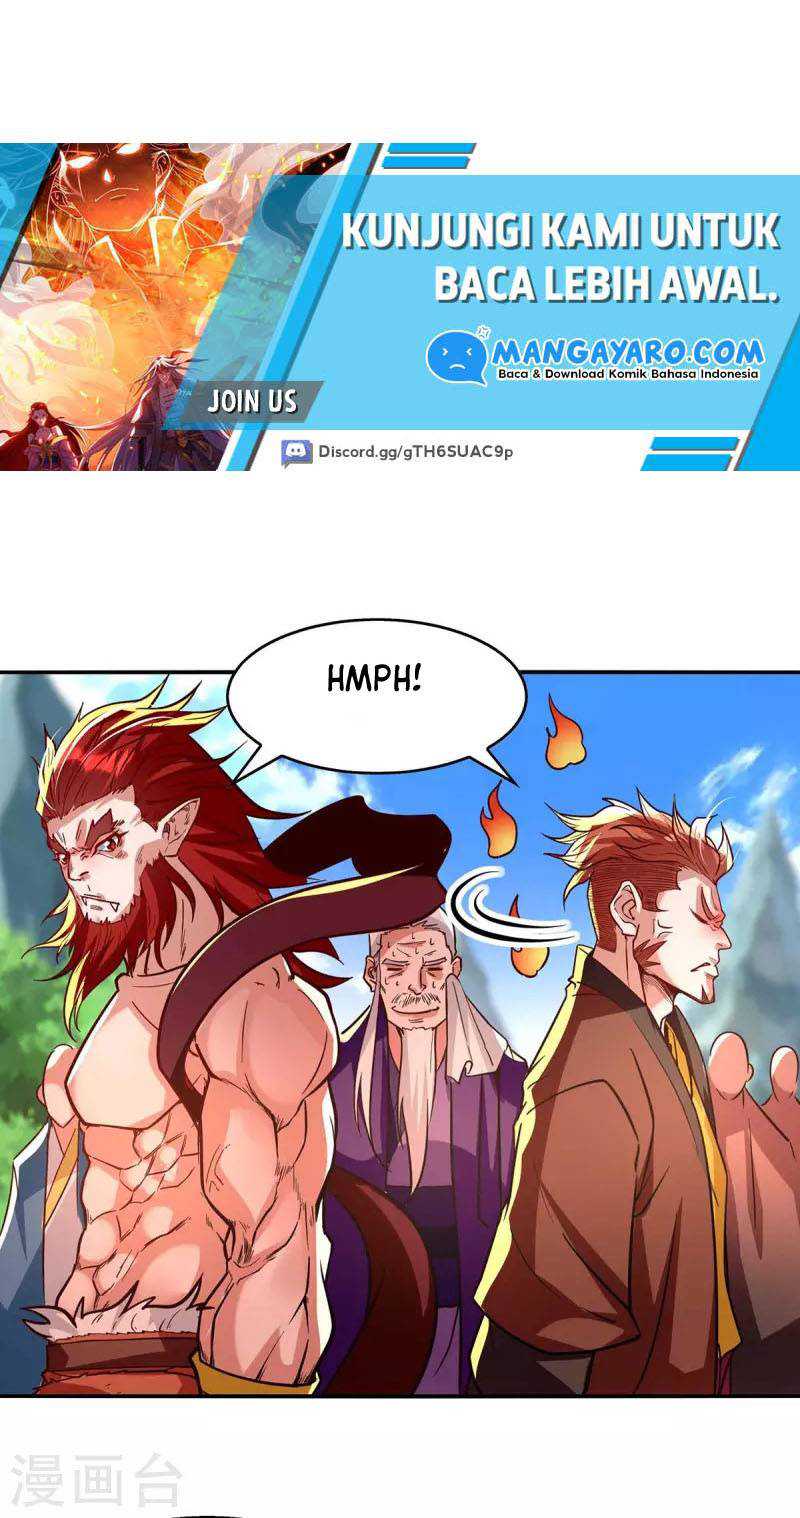 Against The Heaven Supreme (Heaven Guards) Chapter 89 - 191